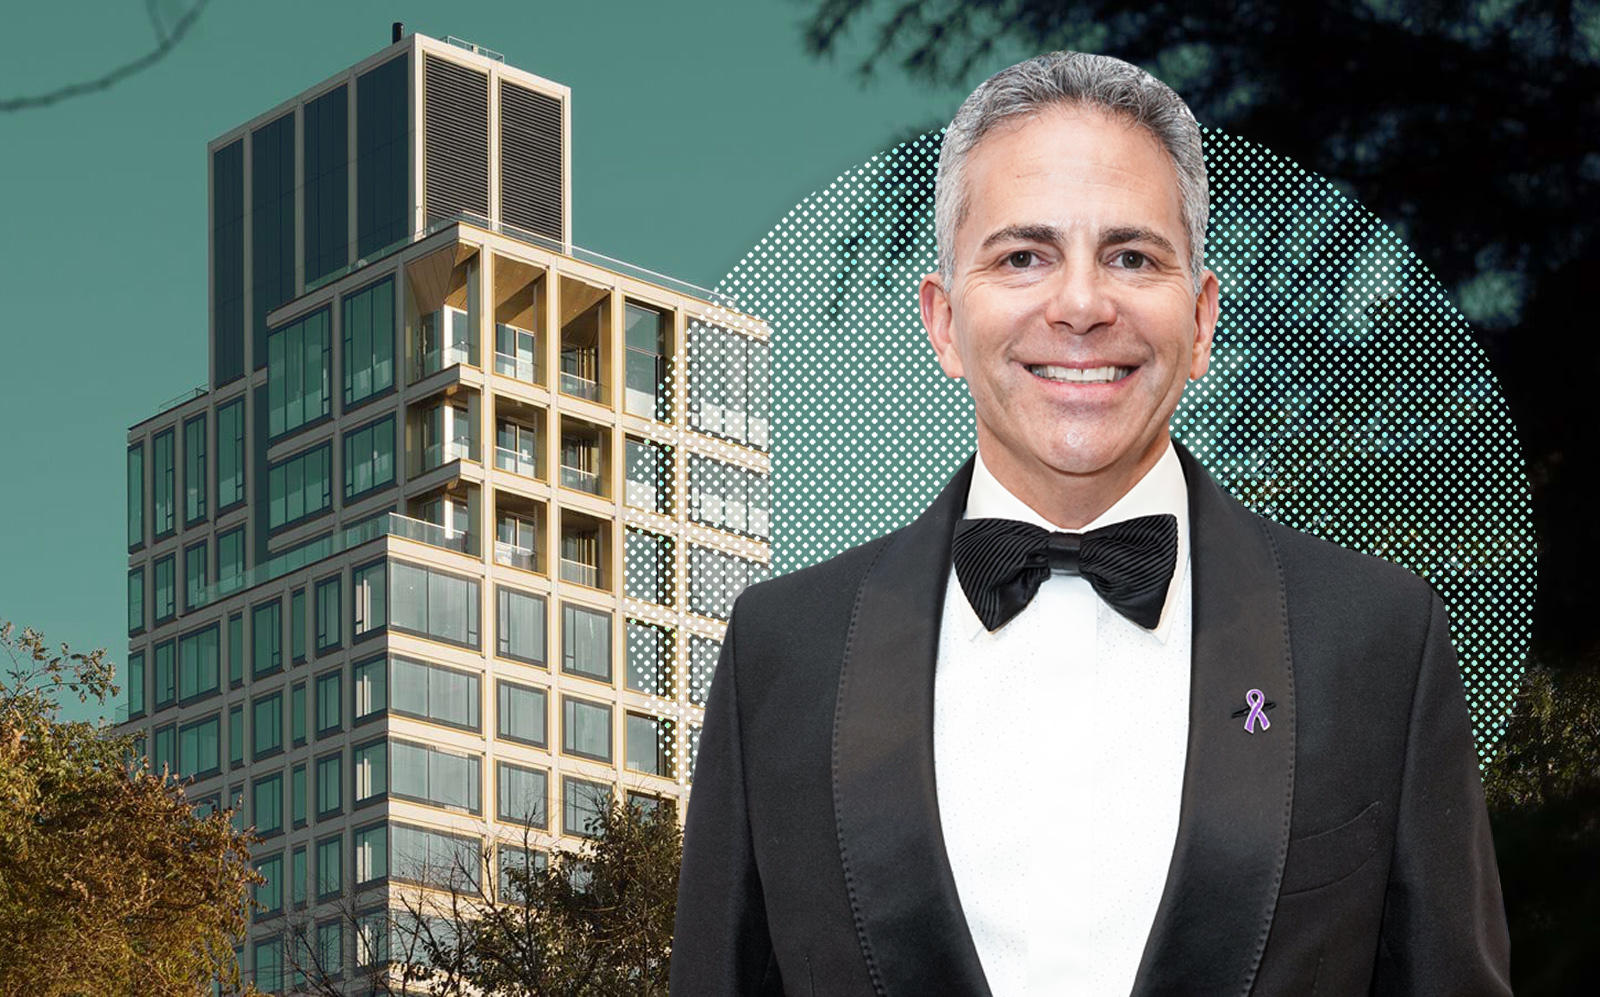 David Weinreb owns the penthouse at 551 West 21st. (Getty, Foster + Partners)